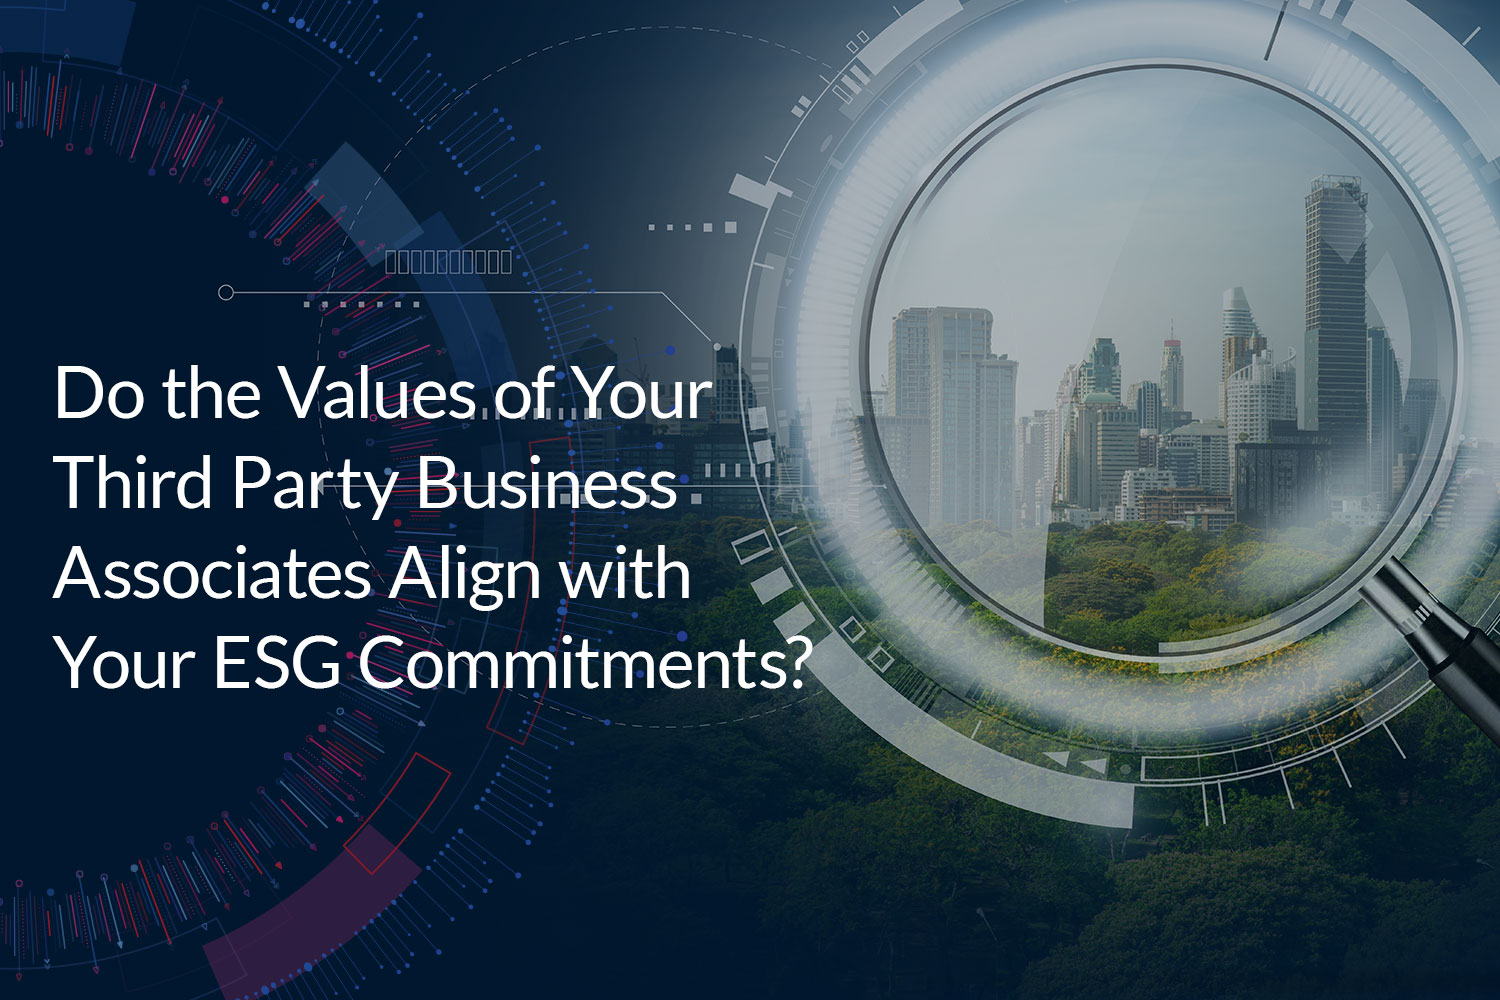 Do the Values of Your Third Party Business Associates Align with Your ESG Commitments?